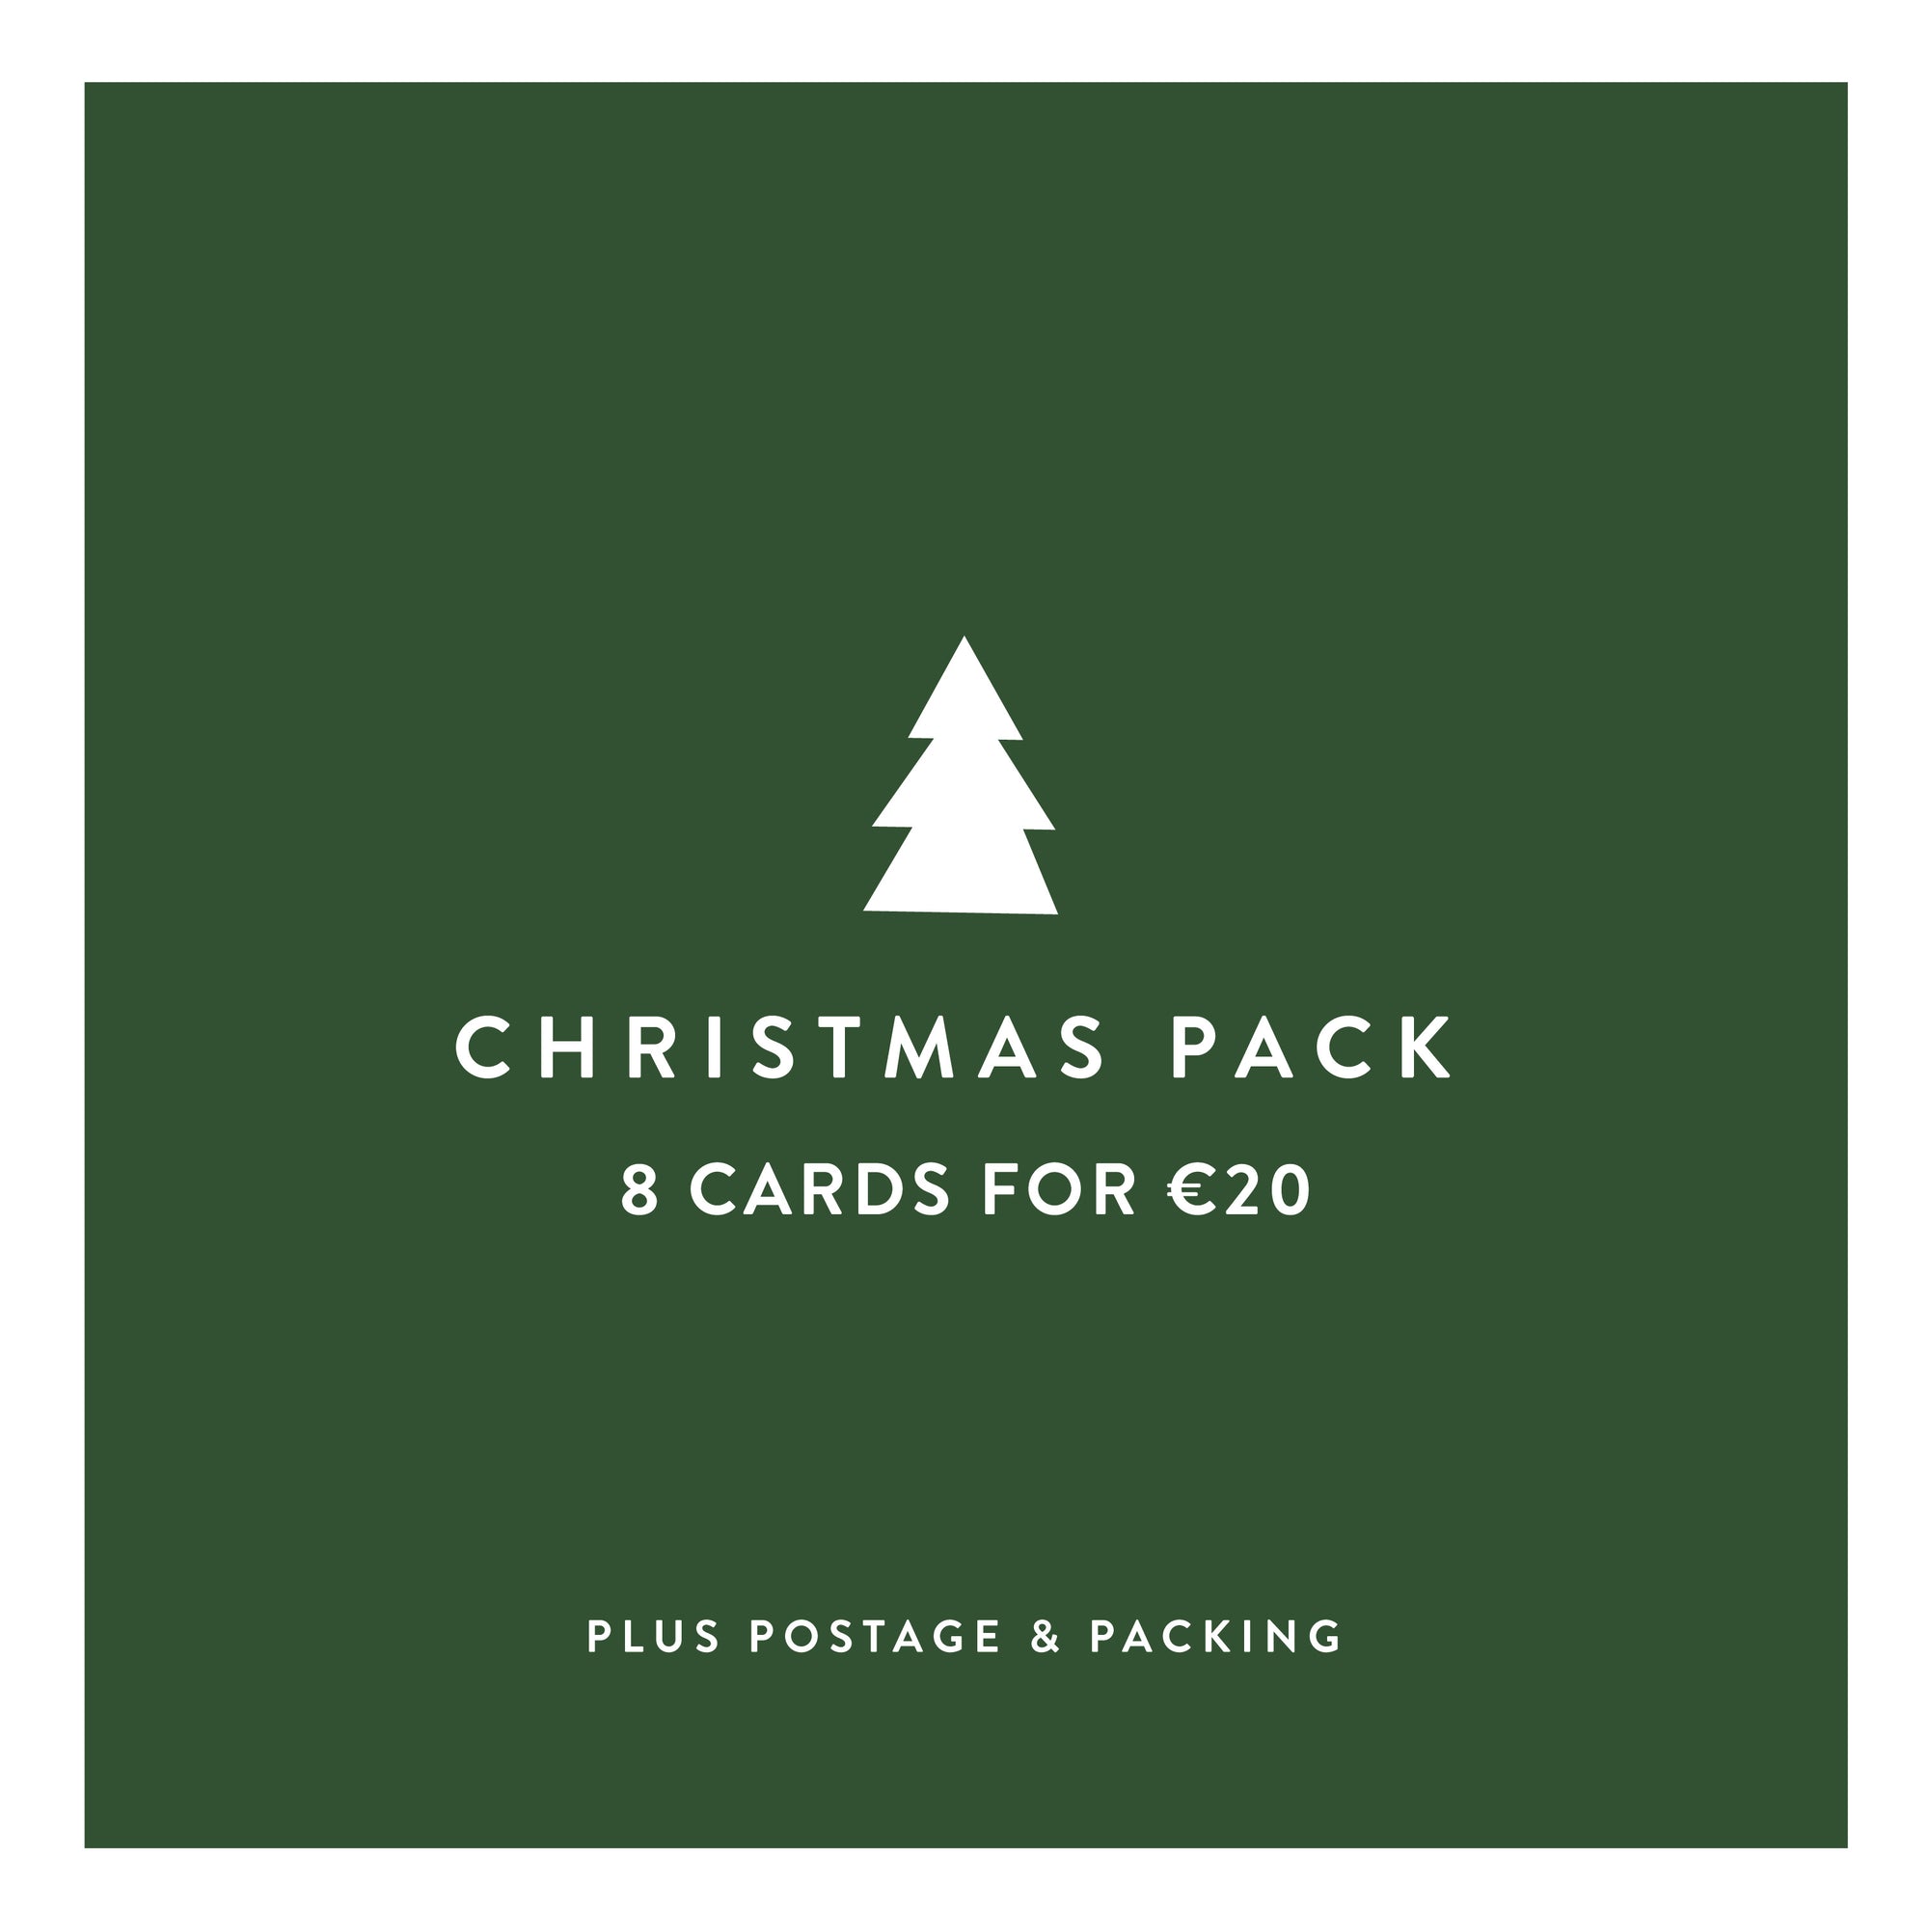 Christmas pack - 8 cards for €20